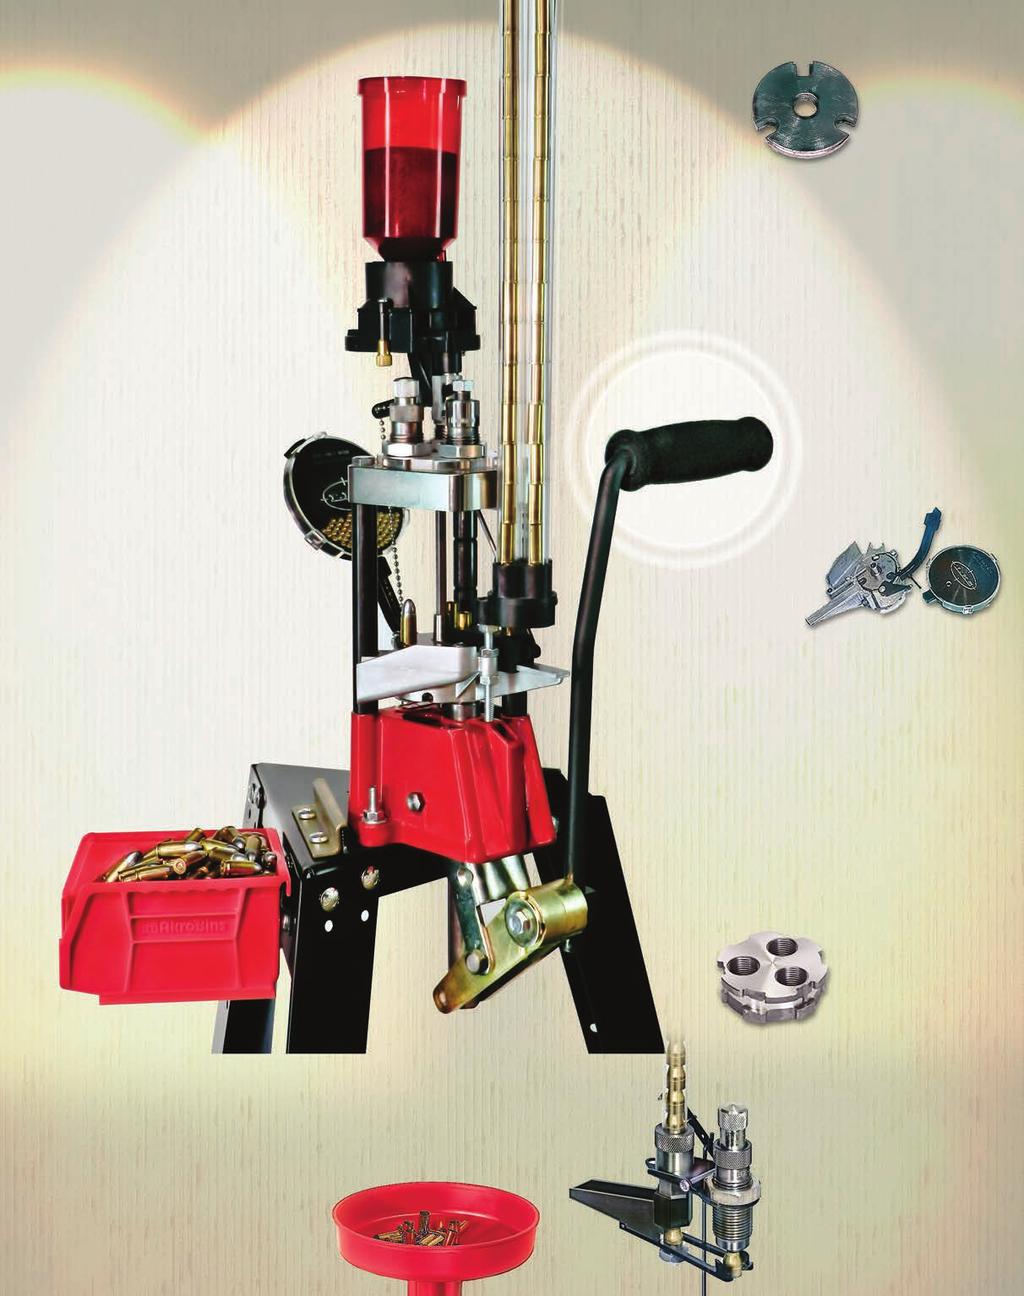 LEE PRO 1000 Fully automatic Lee Pro 1000 Add a bullet and pull the lever; all other operations are automatic. One loaded cartridge with each pull of the lever. Every operation is automatic.